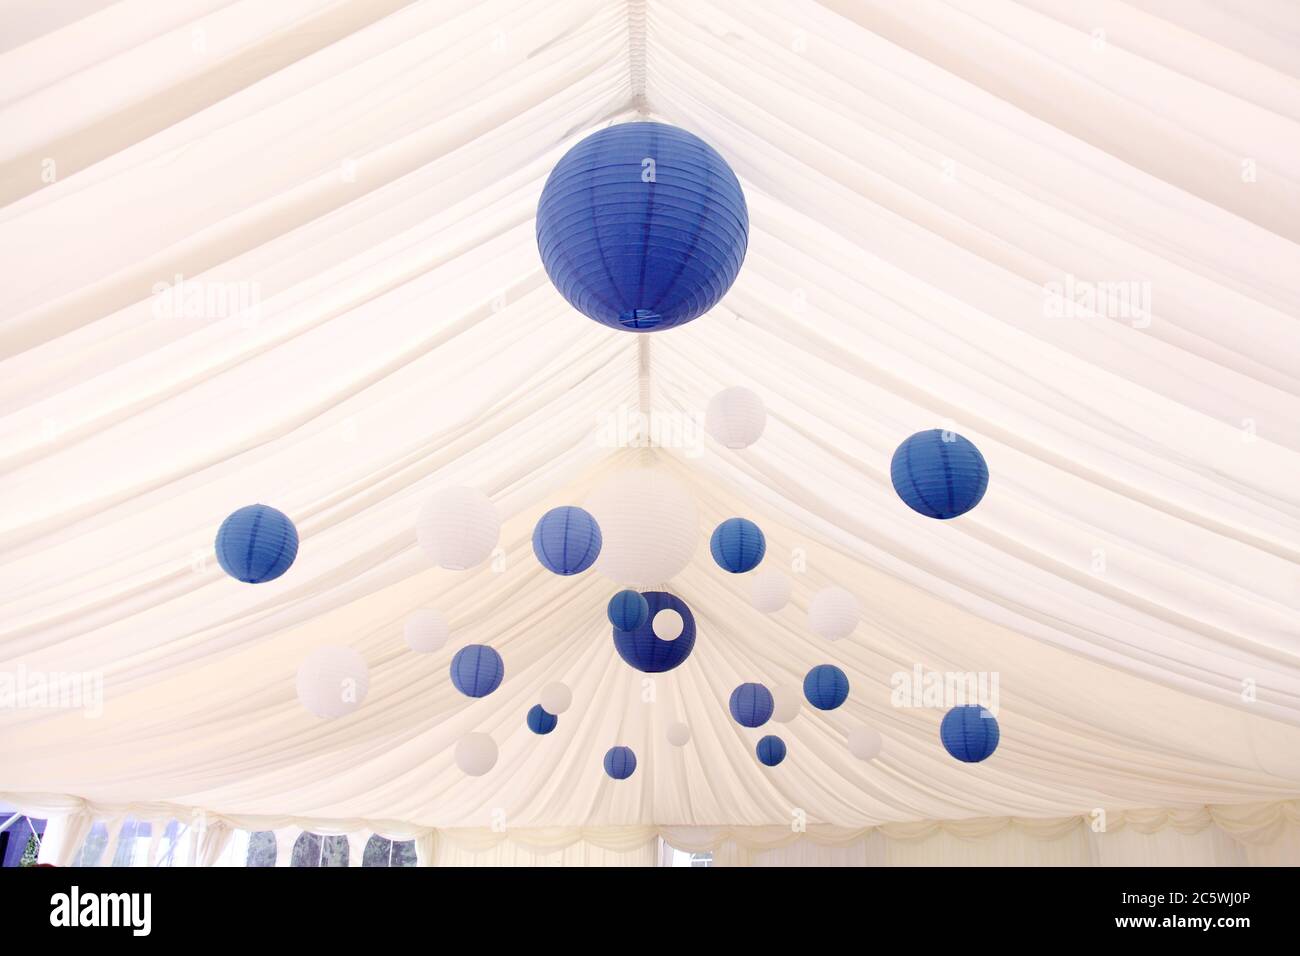 Blue & white wedding pom poms or Chinese paper lanterns in a white wedding marquee as wedding venue decorations. Stock Photo